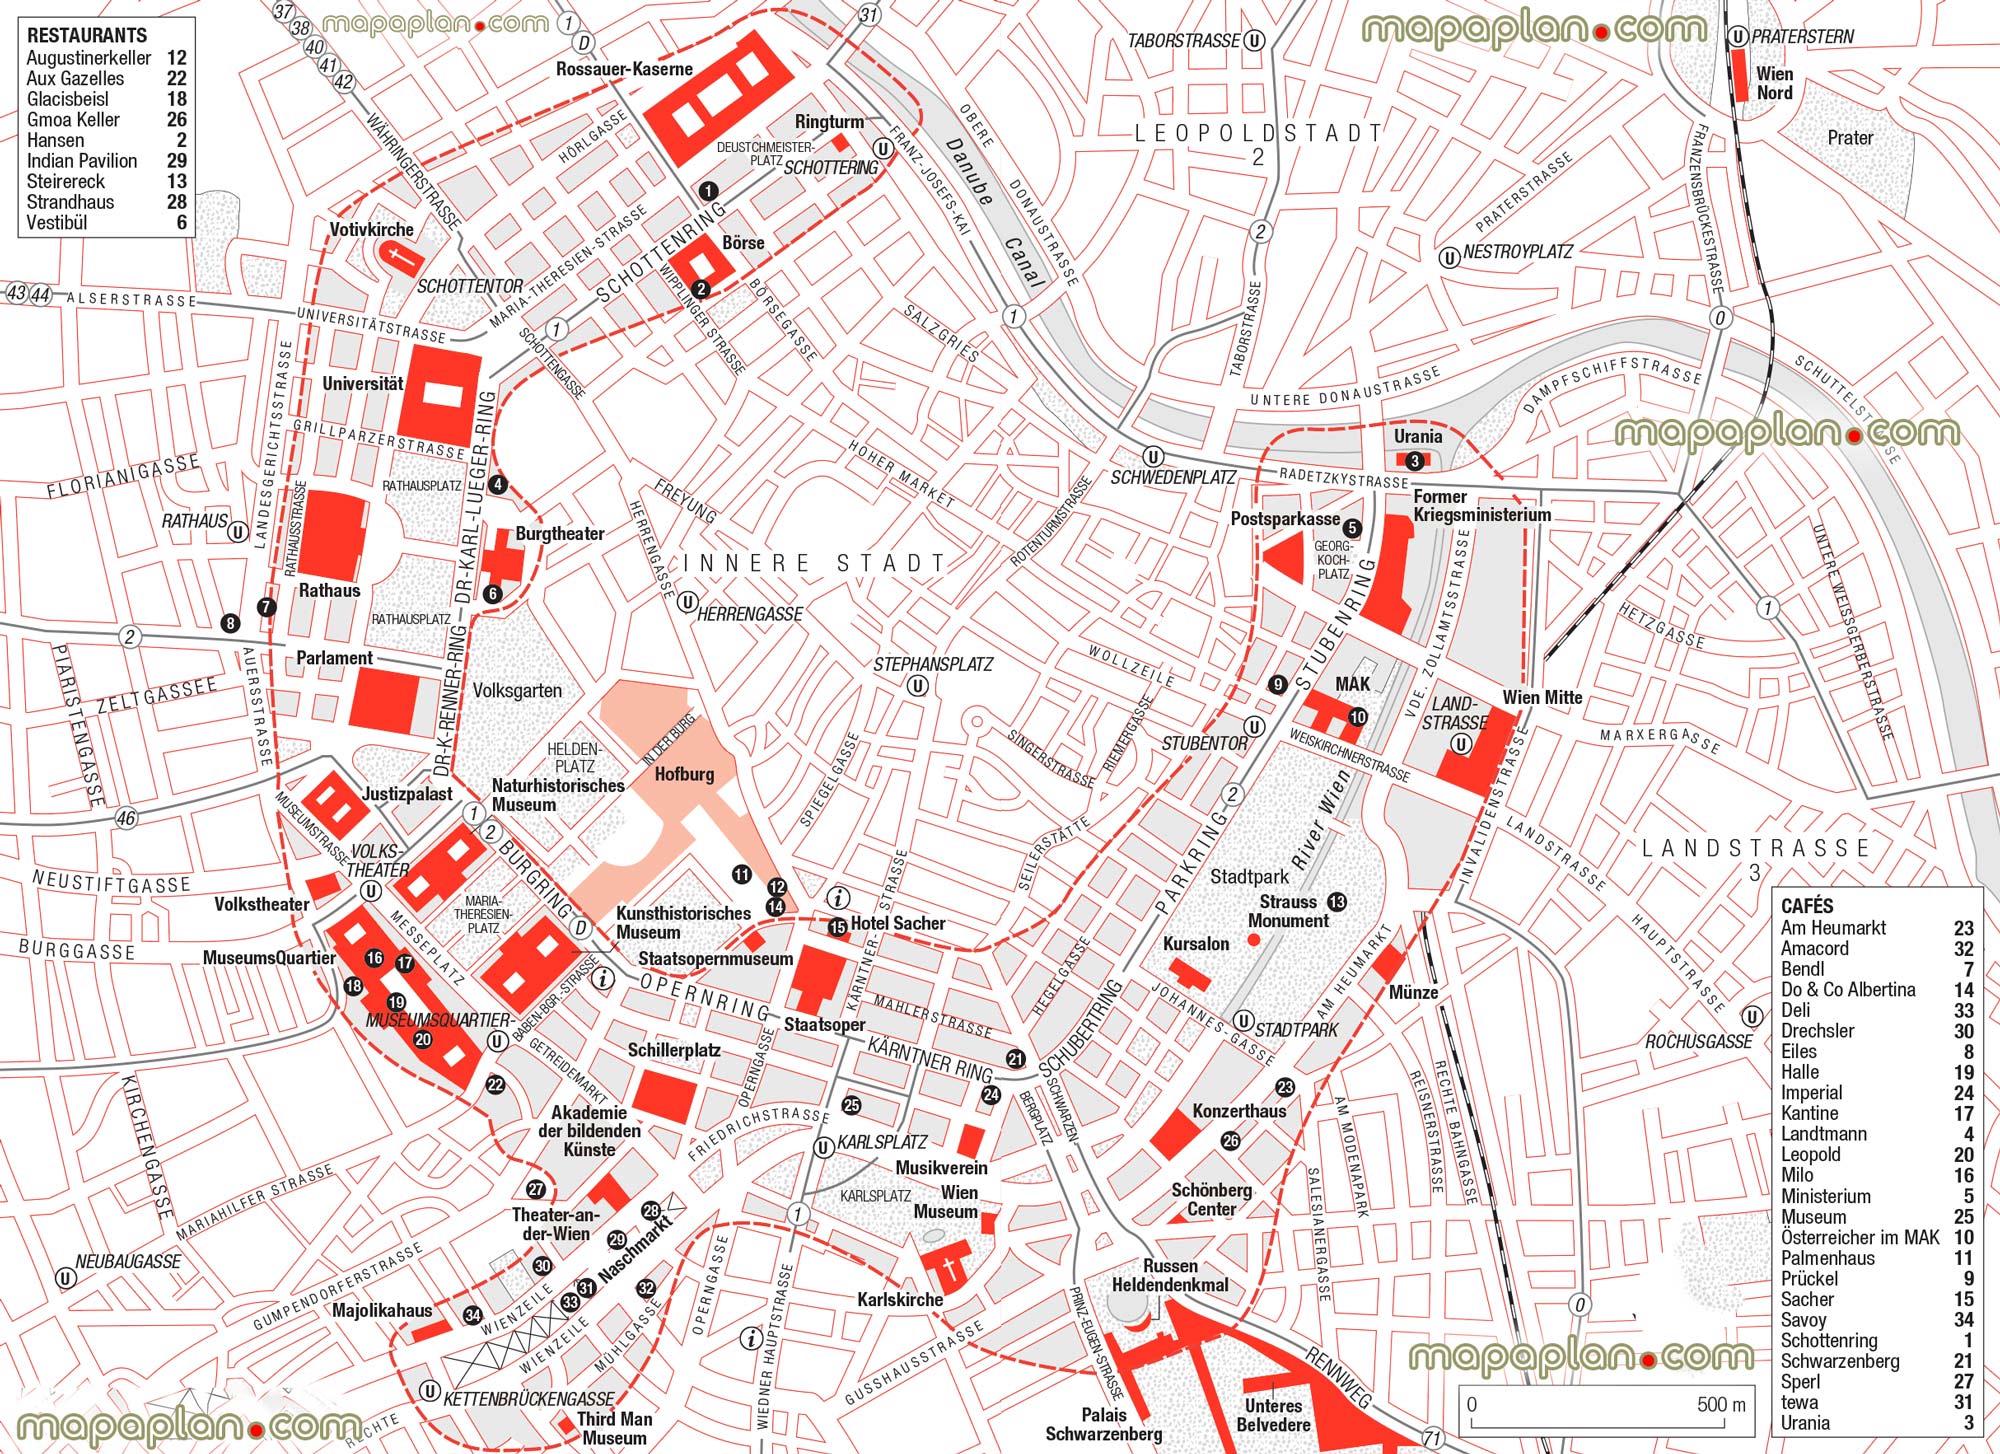 ringstrasse main shopping ring street maps Vienna Top tourist attractions map